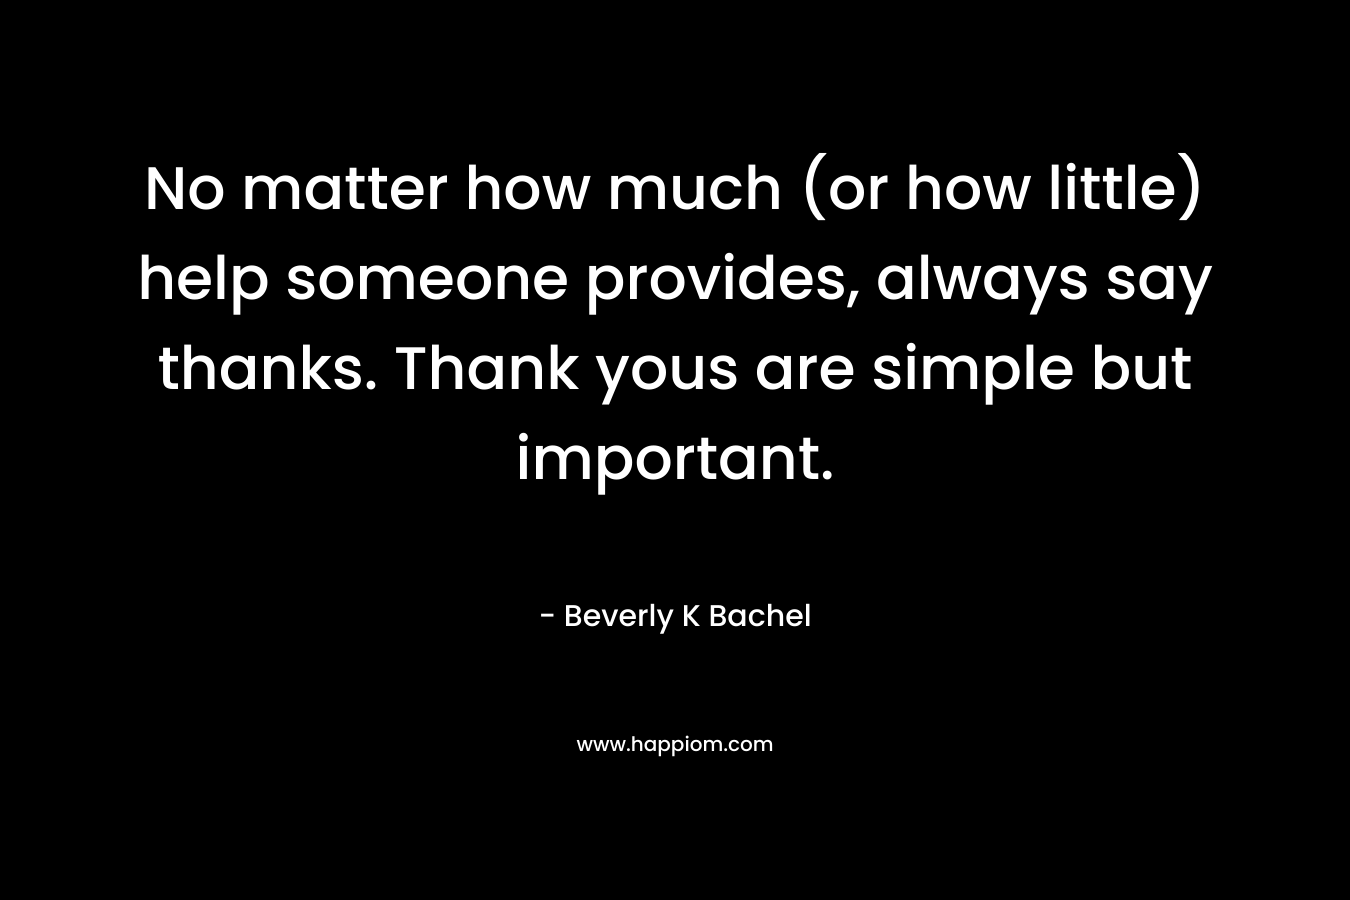 No matter how much (or how little) help someone provides, always say thanks. Thank yous are simple but important.